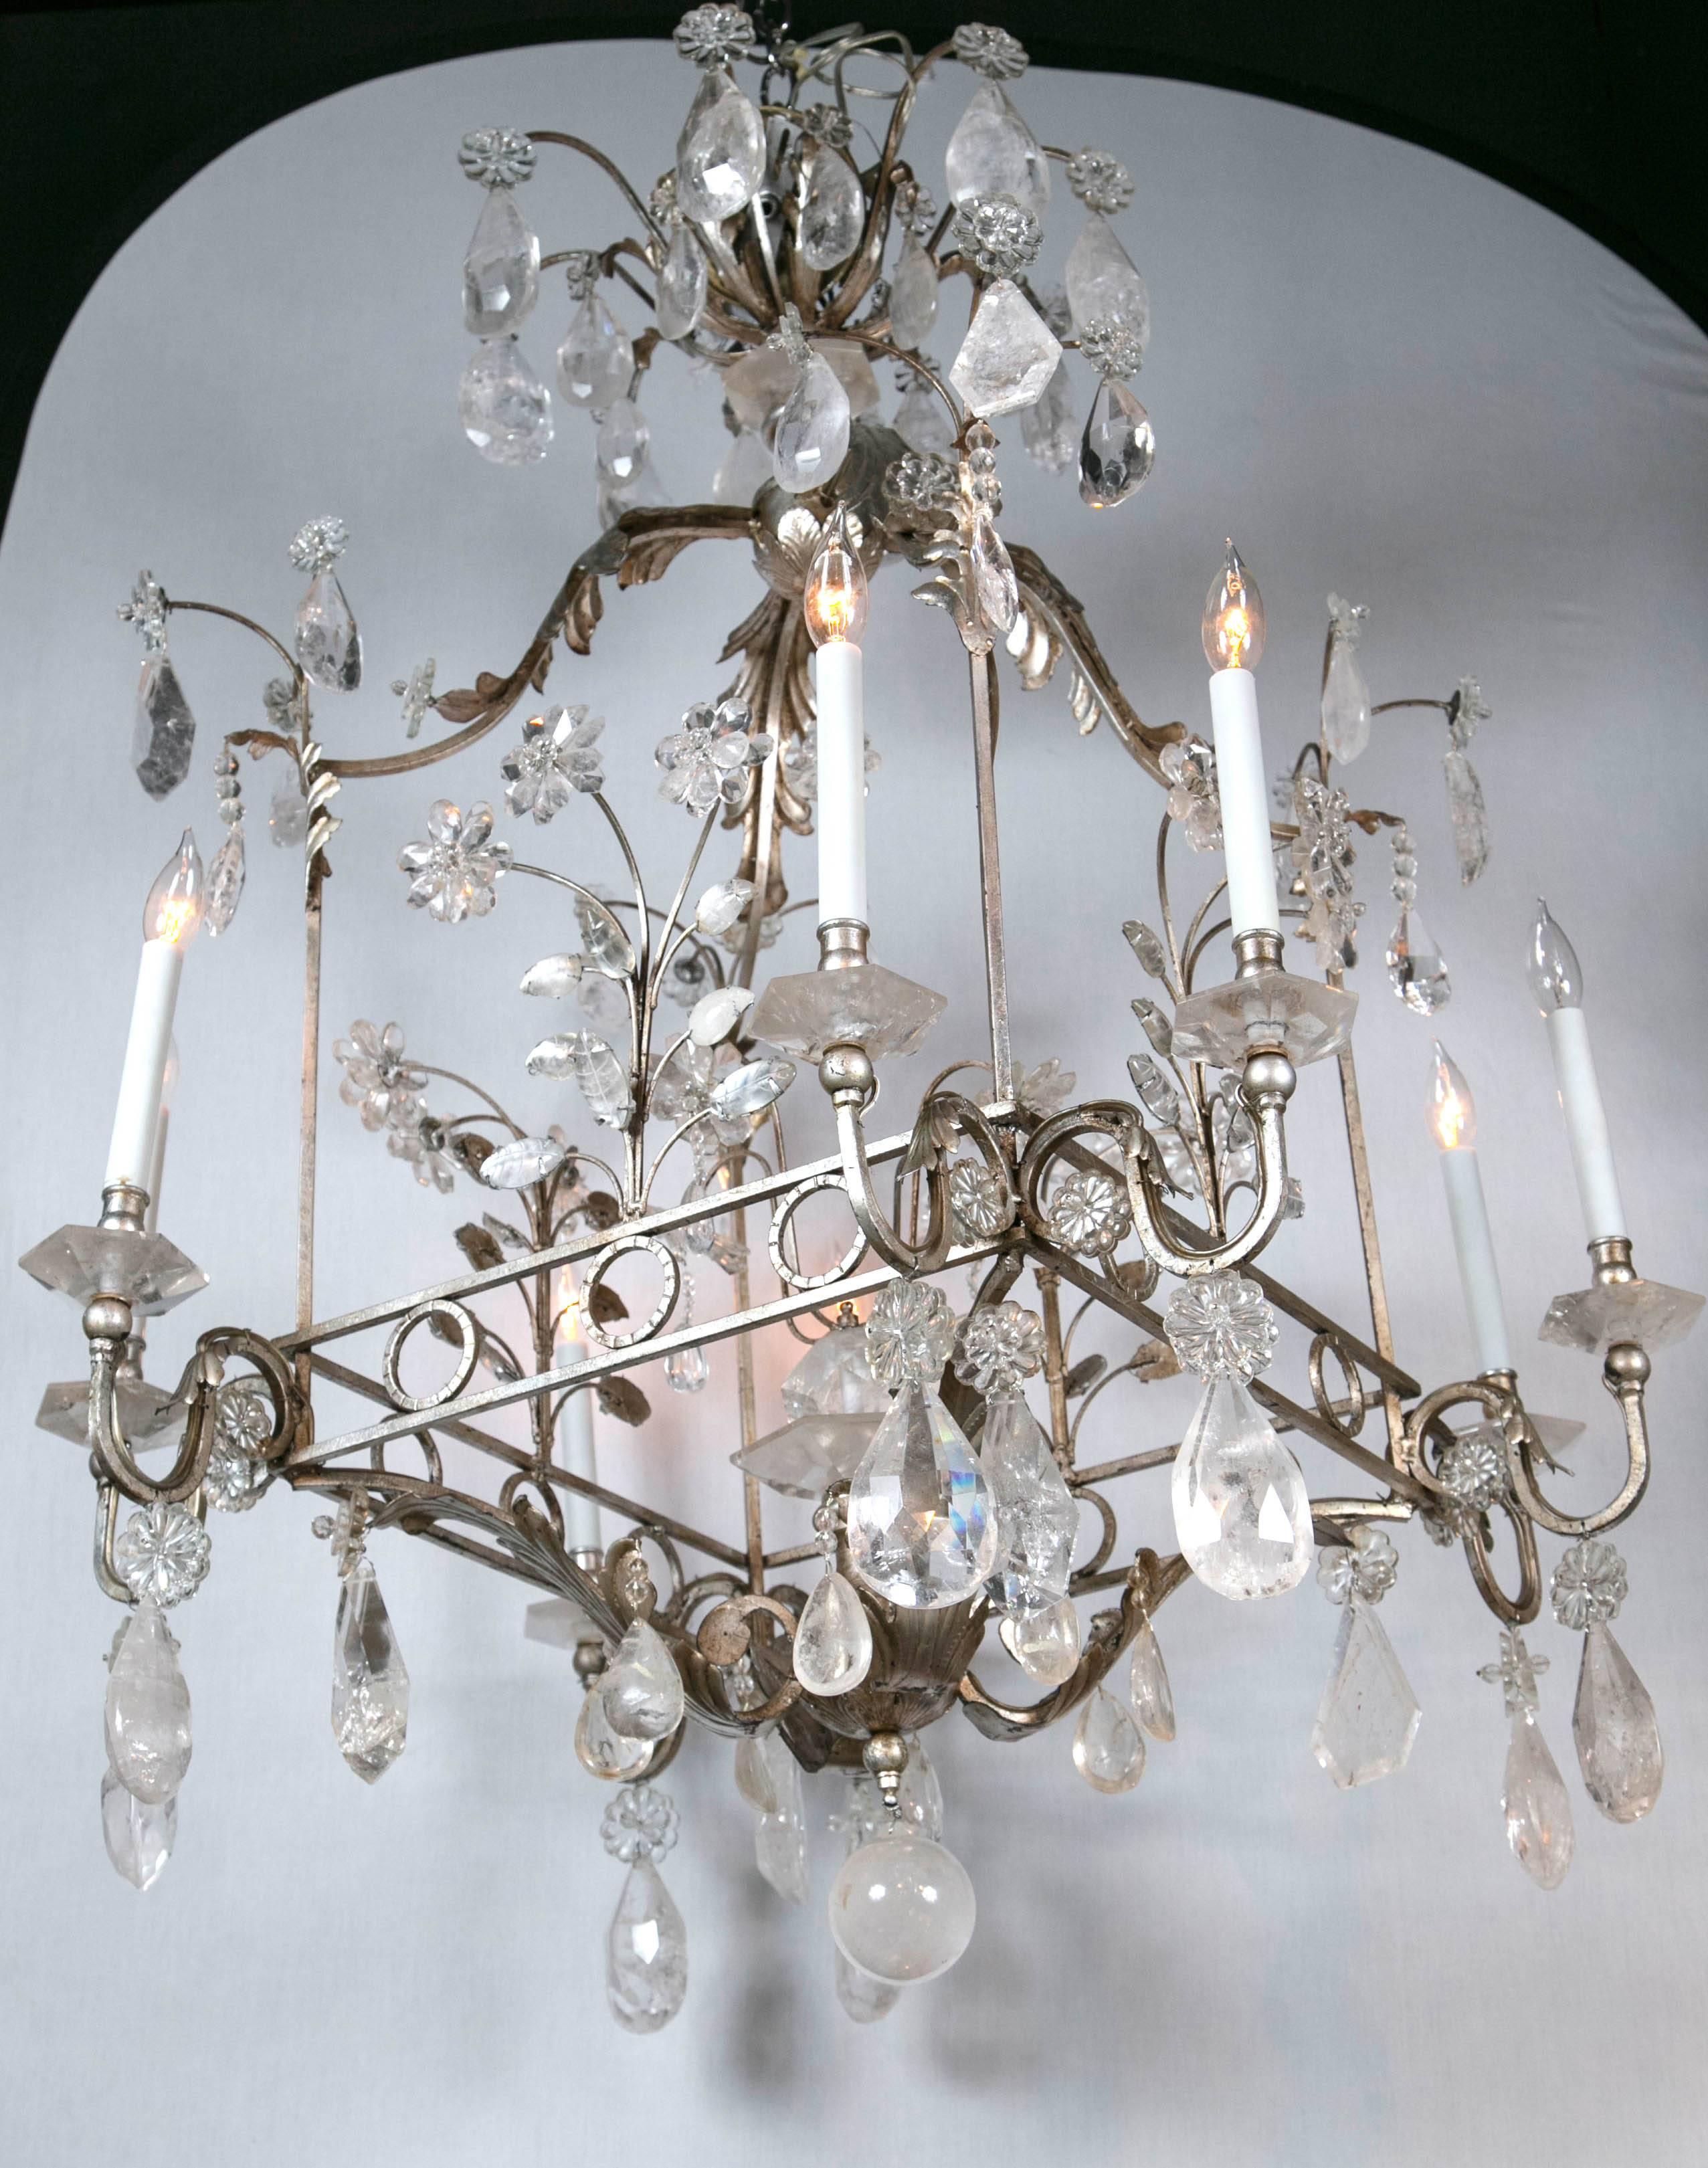 Quatrain Bagues style rock crystal chandelier with exquisite rock crystal ornaments and silver finish.